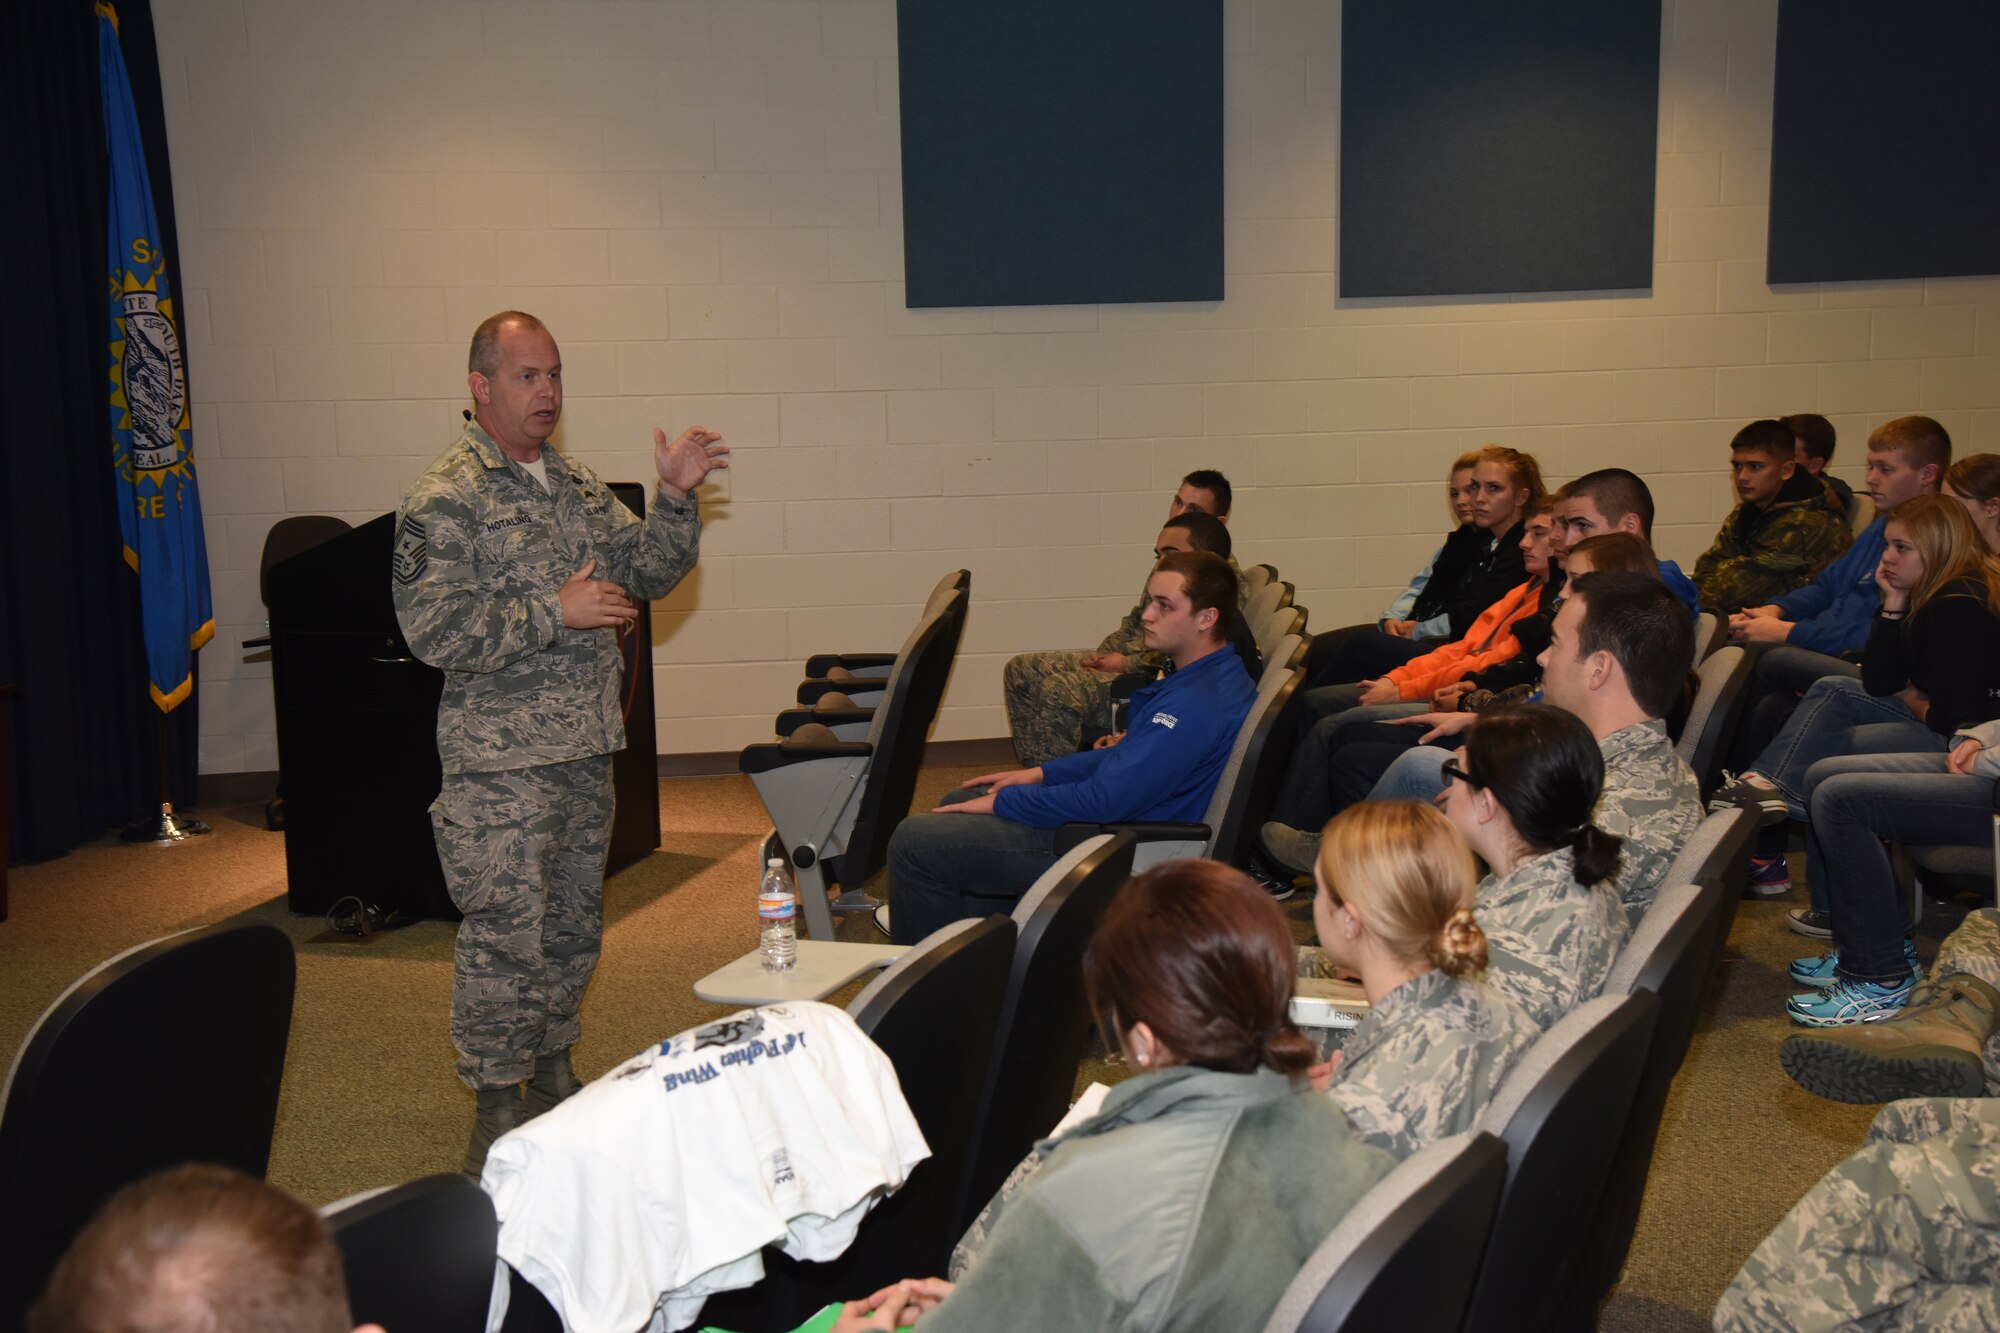 SIOUX FALLS, S.D. - Command Chief Master Sergeant of the Air National Guard James W. Hotaling speaks to junior enlisted Airmen from the 114th Fighter Wing, South Dakota Air National Guard, during and town hall style all call meeting at Joe Foss Field, S.D., Nov. 7, 2015. The ANG’s senior enlisted advisor had a packed schedule and Airmen from every facet of the 114th FW were given the chance to interact with him during his visit. (U.S. Air National Guard photo by Staff Sgt. Luke Olson/Released)